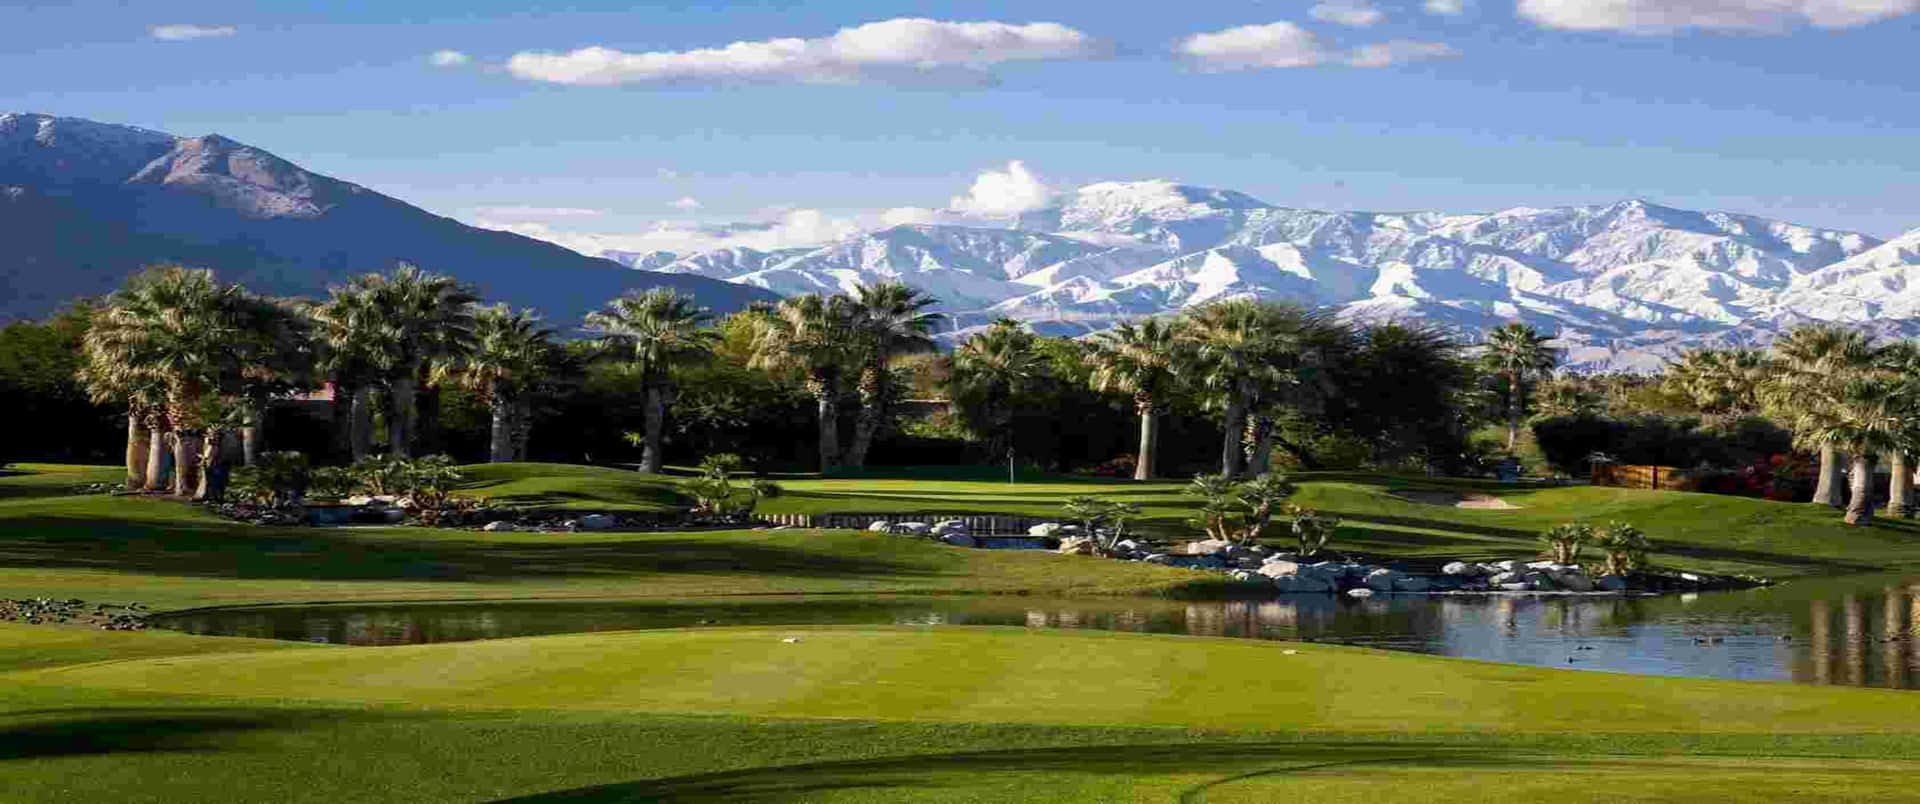 Tahquitz Creek In 3440x1440p Golf Course Background